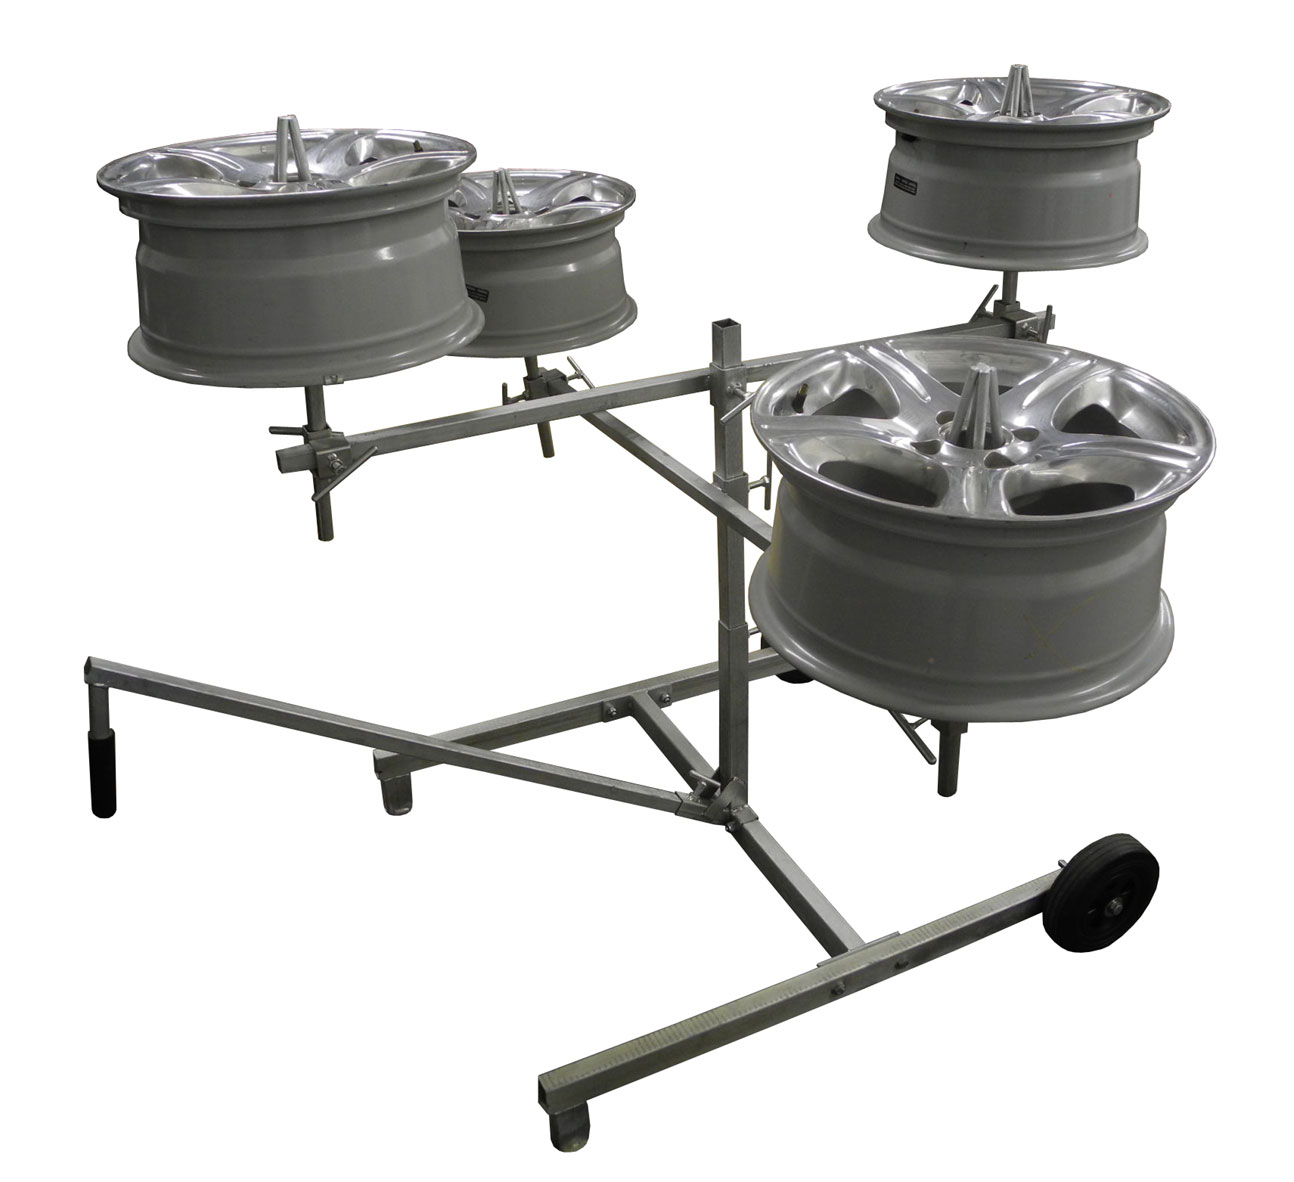 WHEEL RIM SPINNER HOLDER FOR PAINTING WHEELS.CLAMPS TO PANEL STAND OR WORKBENCH